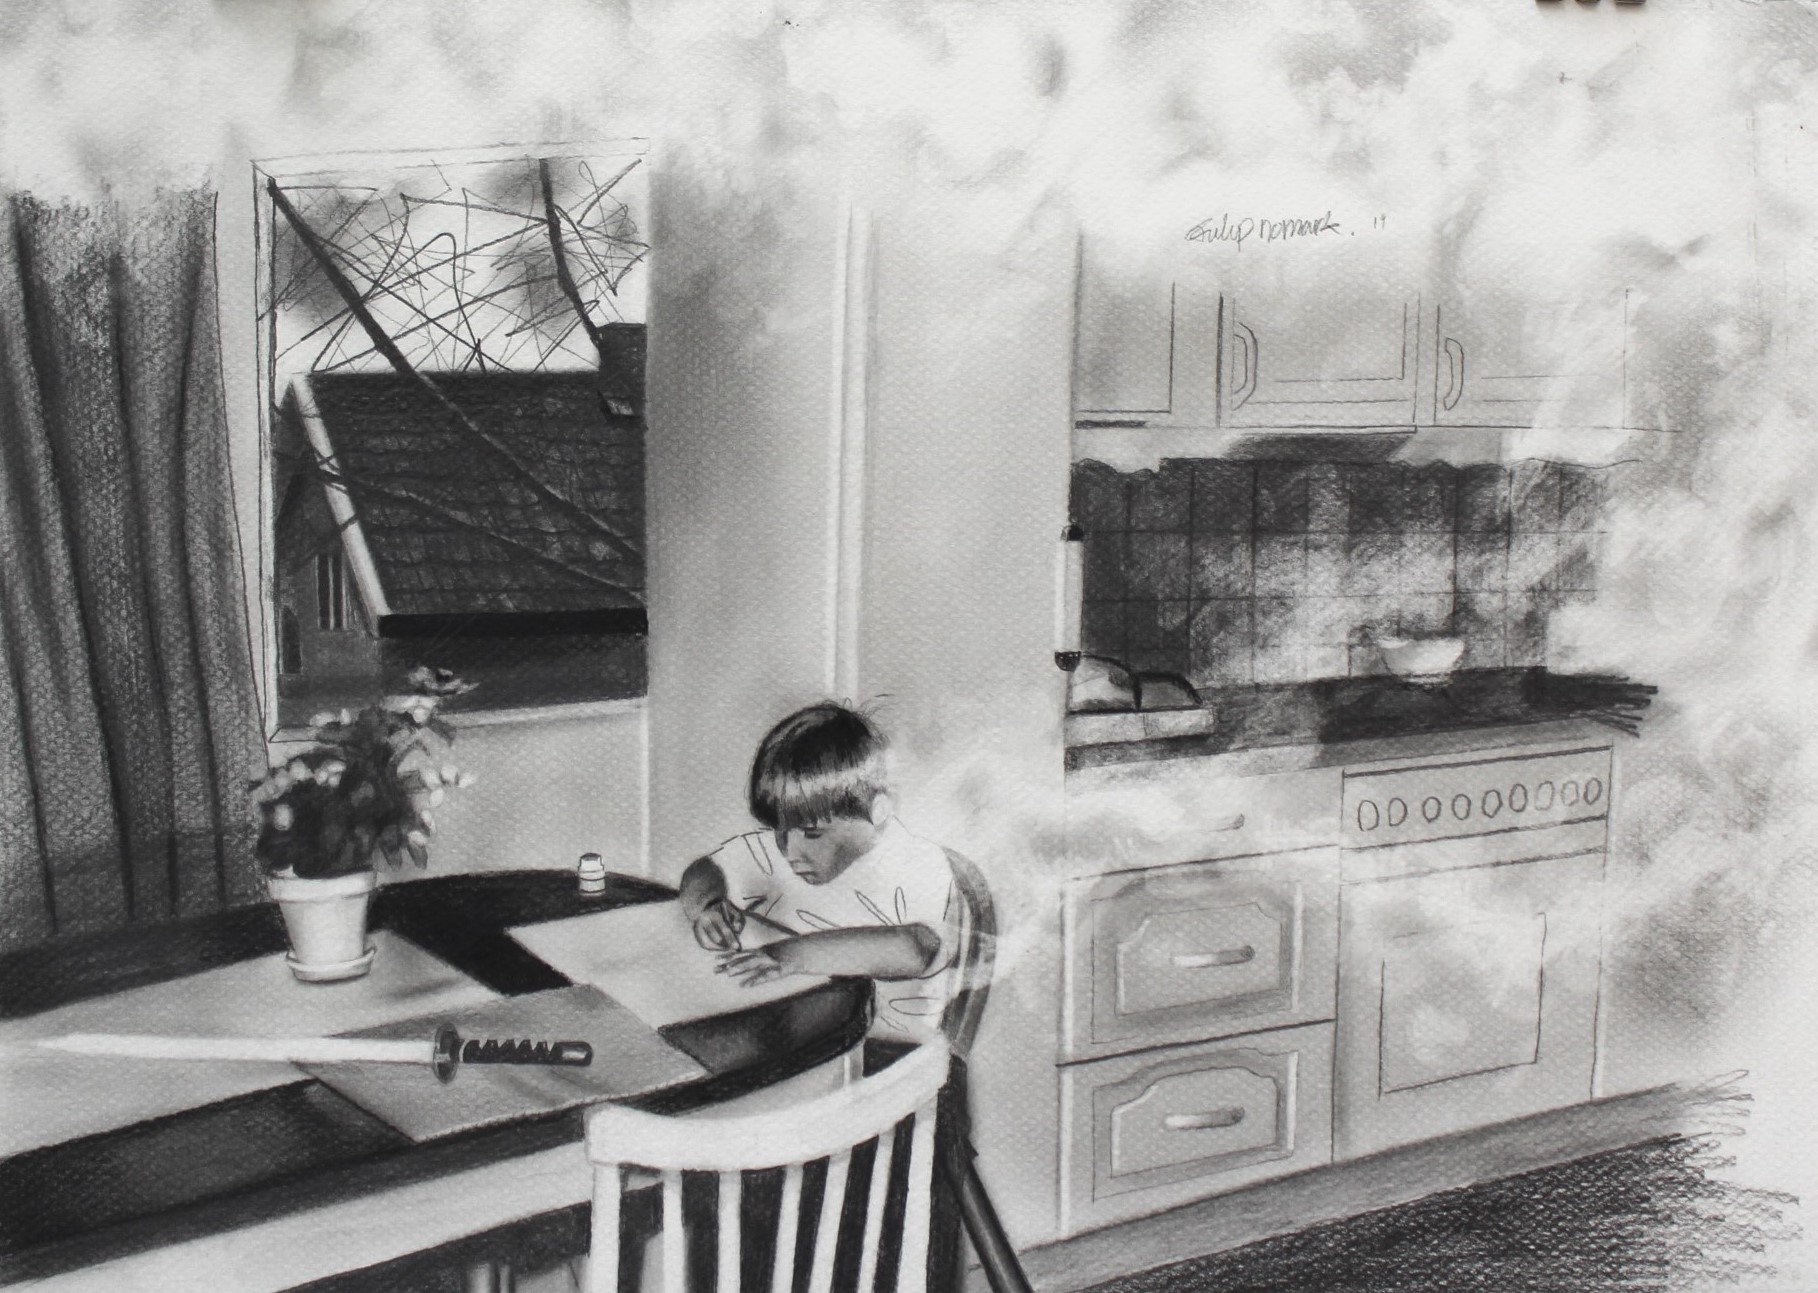 A graphite drawing of. child at a kitchen table surrounded by smoke.